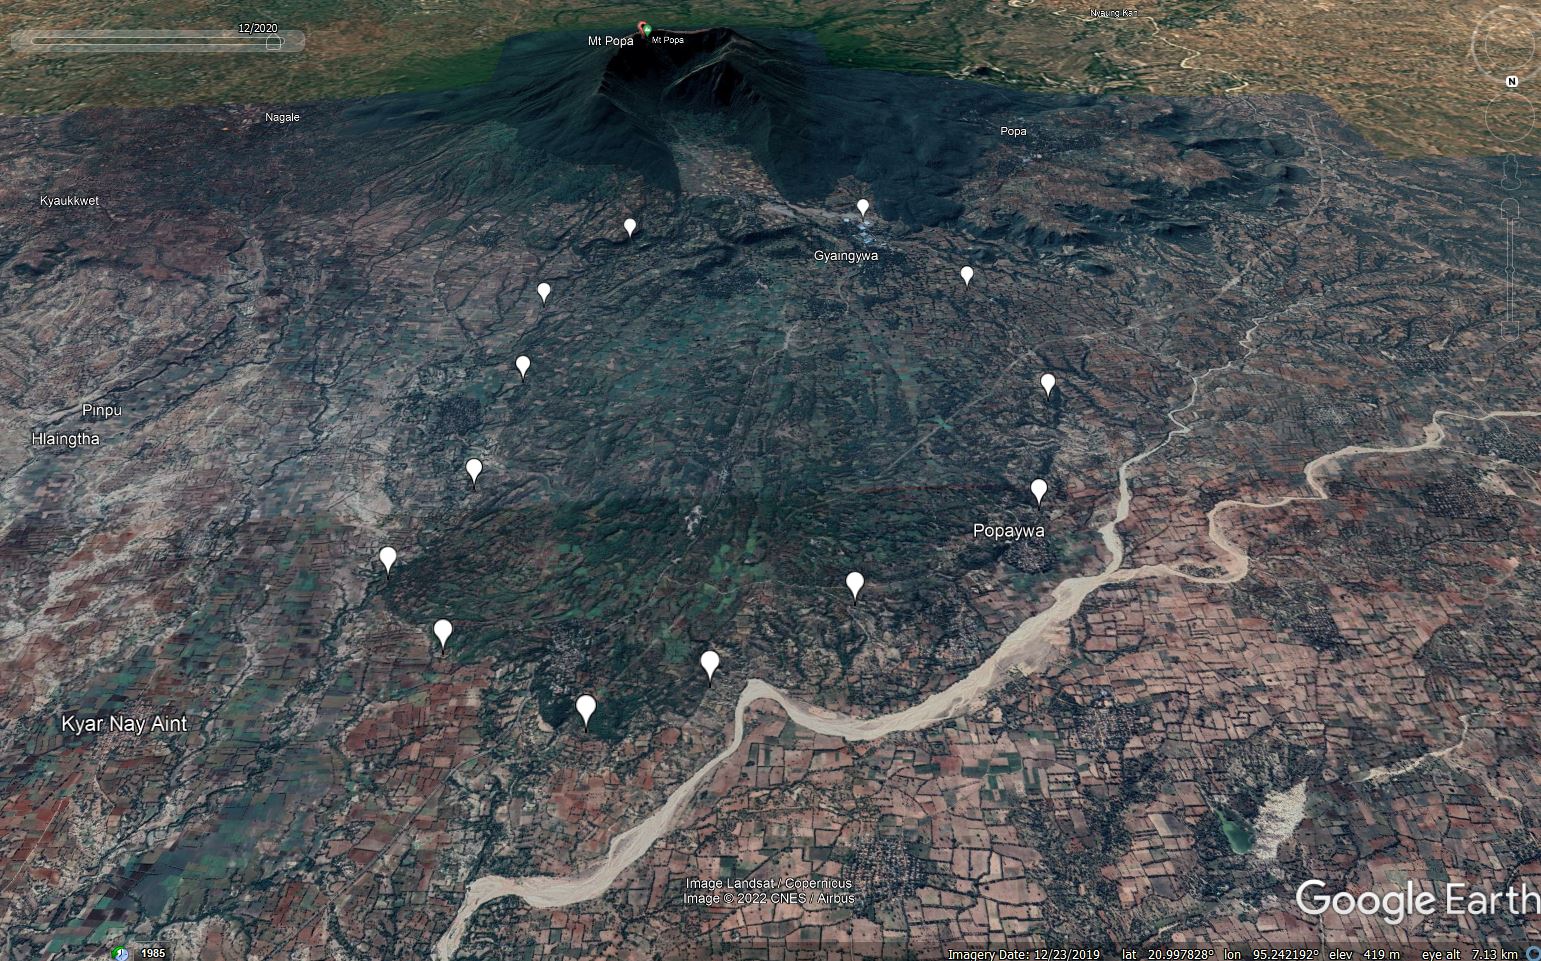 Google Earth image of the aftermath of the flank collapse at Mount Popa in Myanmar, marked with the approximate boundaries of the debris avalanche.